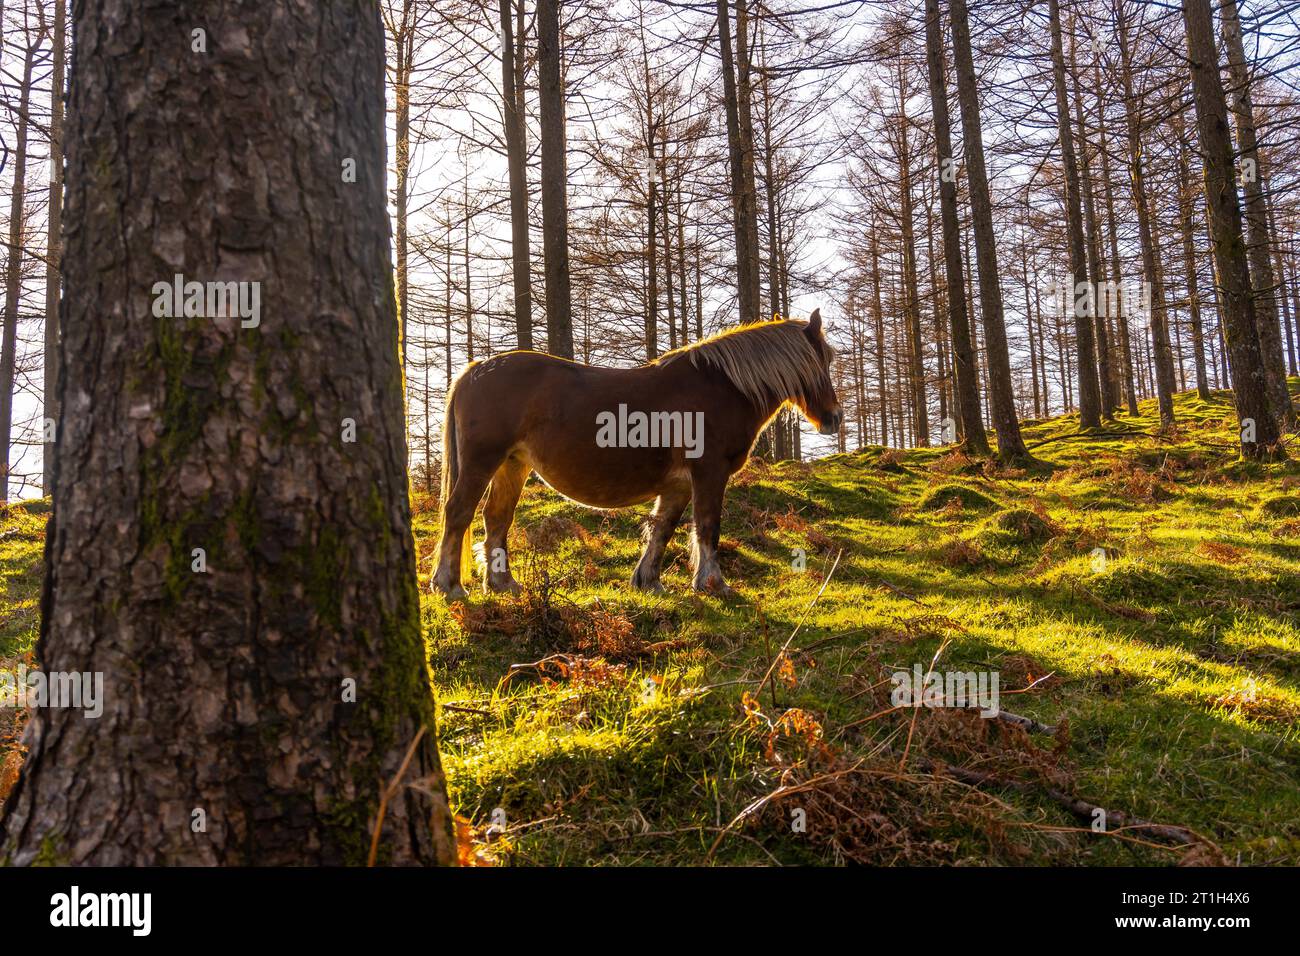 Free wild horses in the Oianleku forest at sunrise, in the town of Oiartzun, Gipuzkoa. Basque Country. Spain Stock Photo